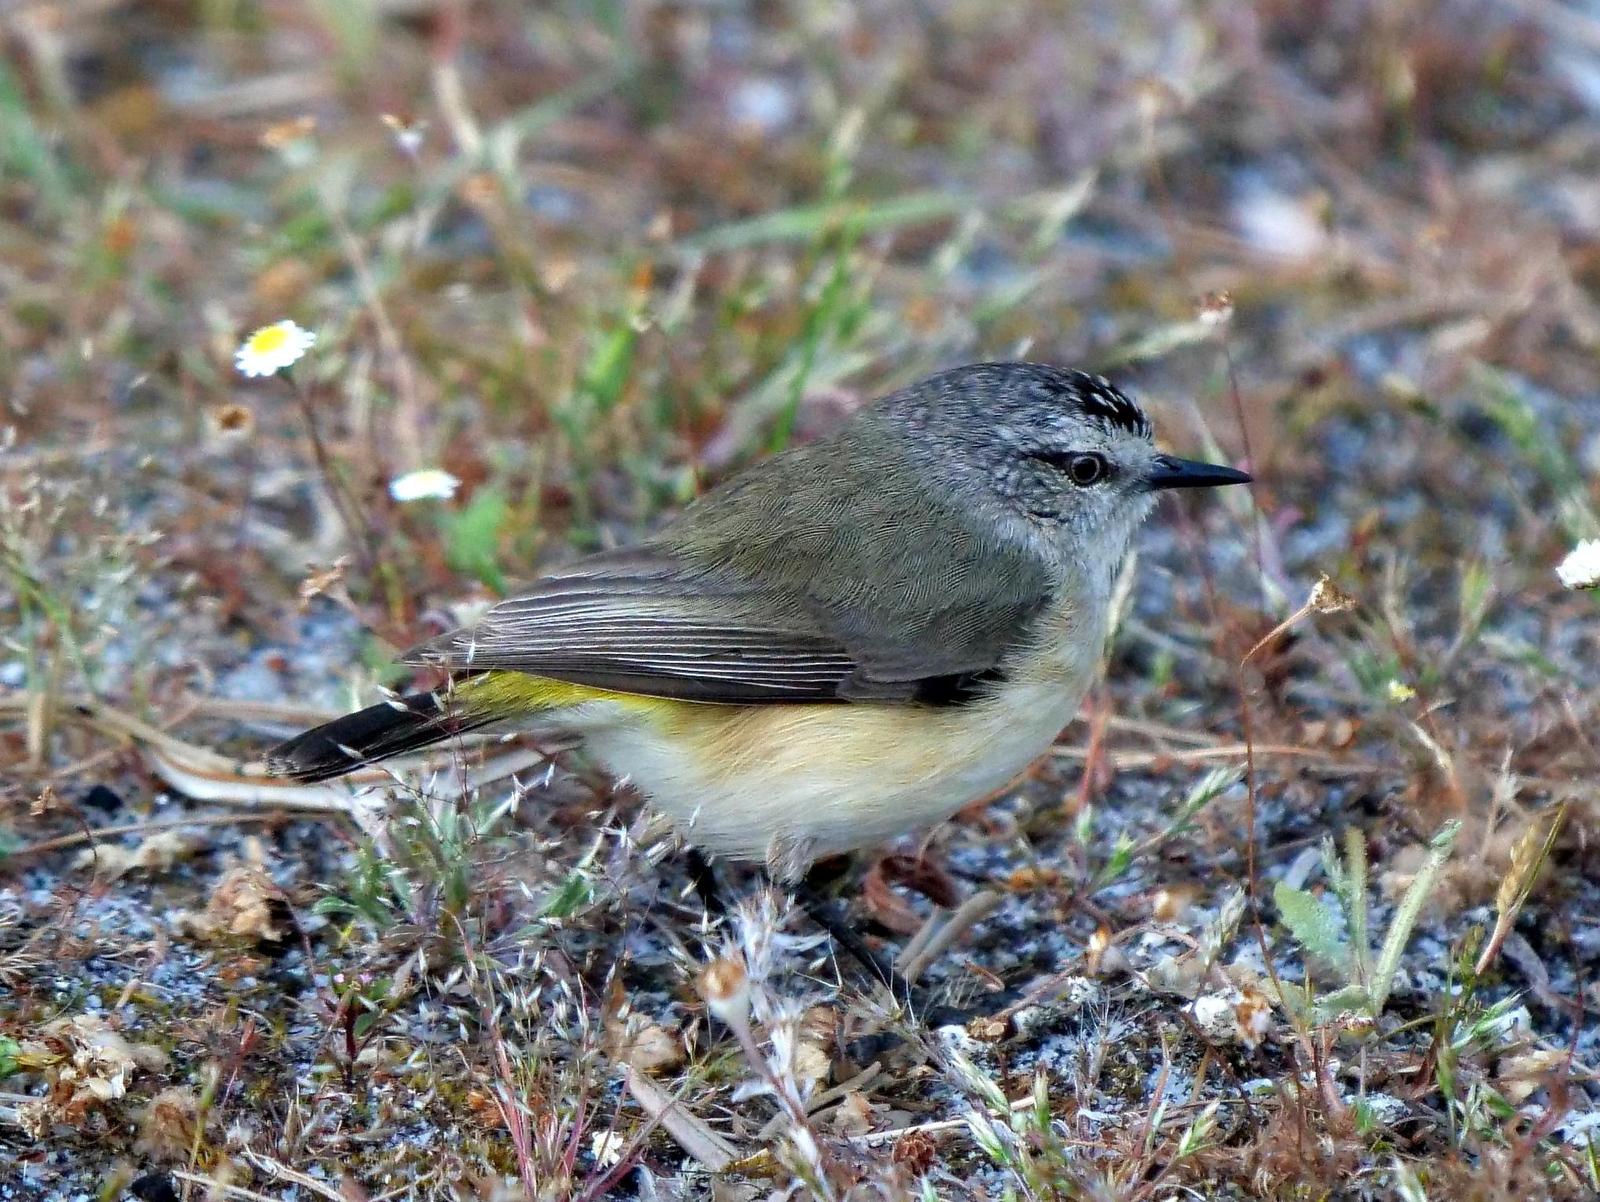 Yellow-rumped Thornbill Photo by Peter Lowe